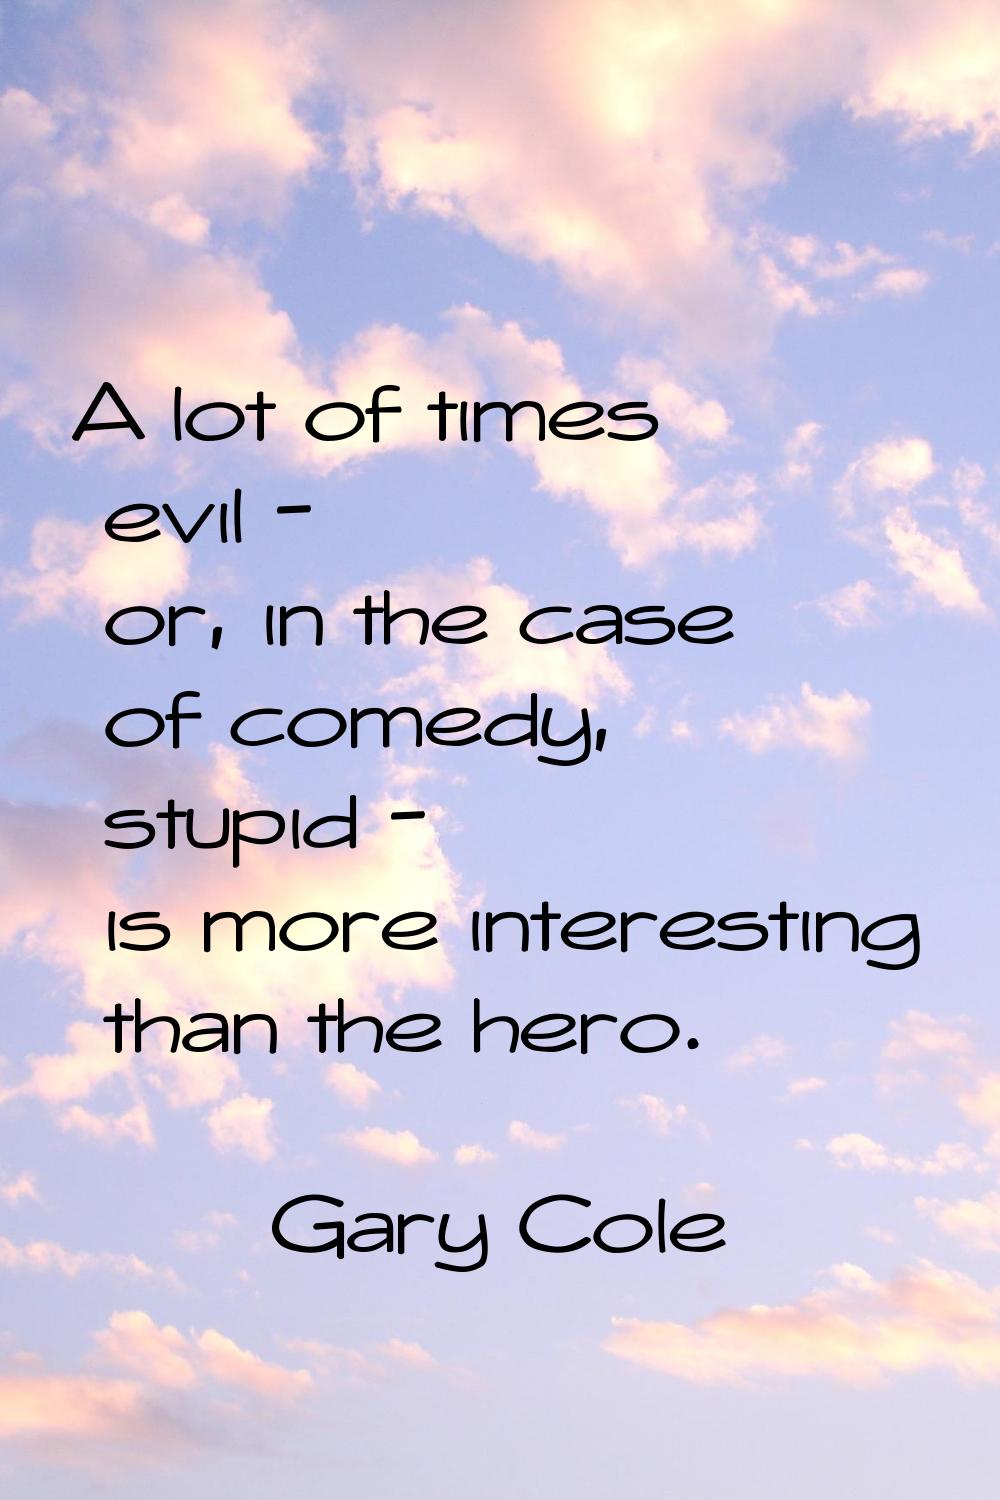 A lot of times evil - or, in the case of comedy, stupid - is more interesting than the hero.